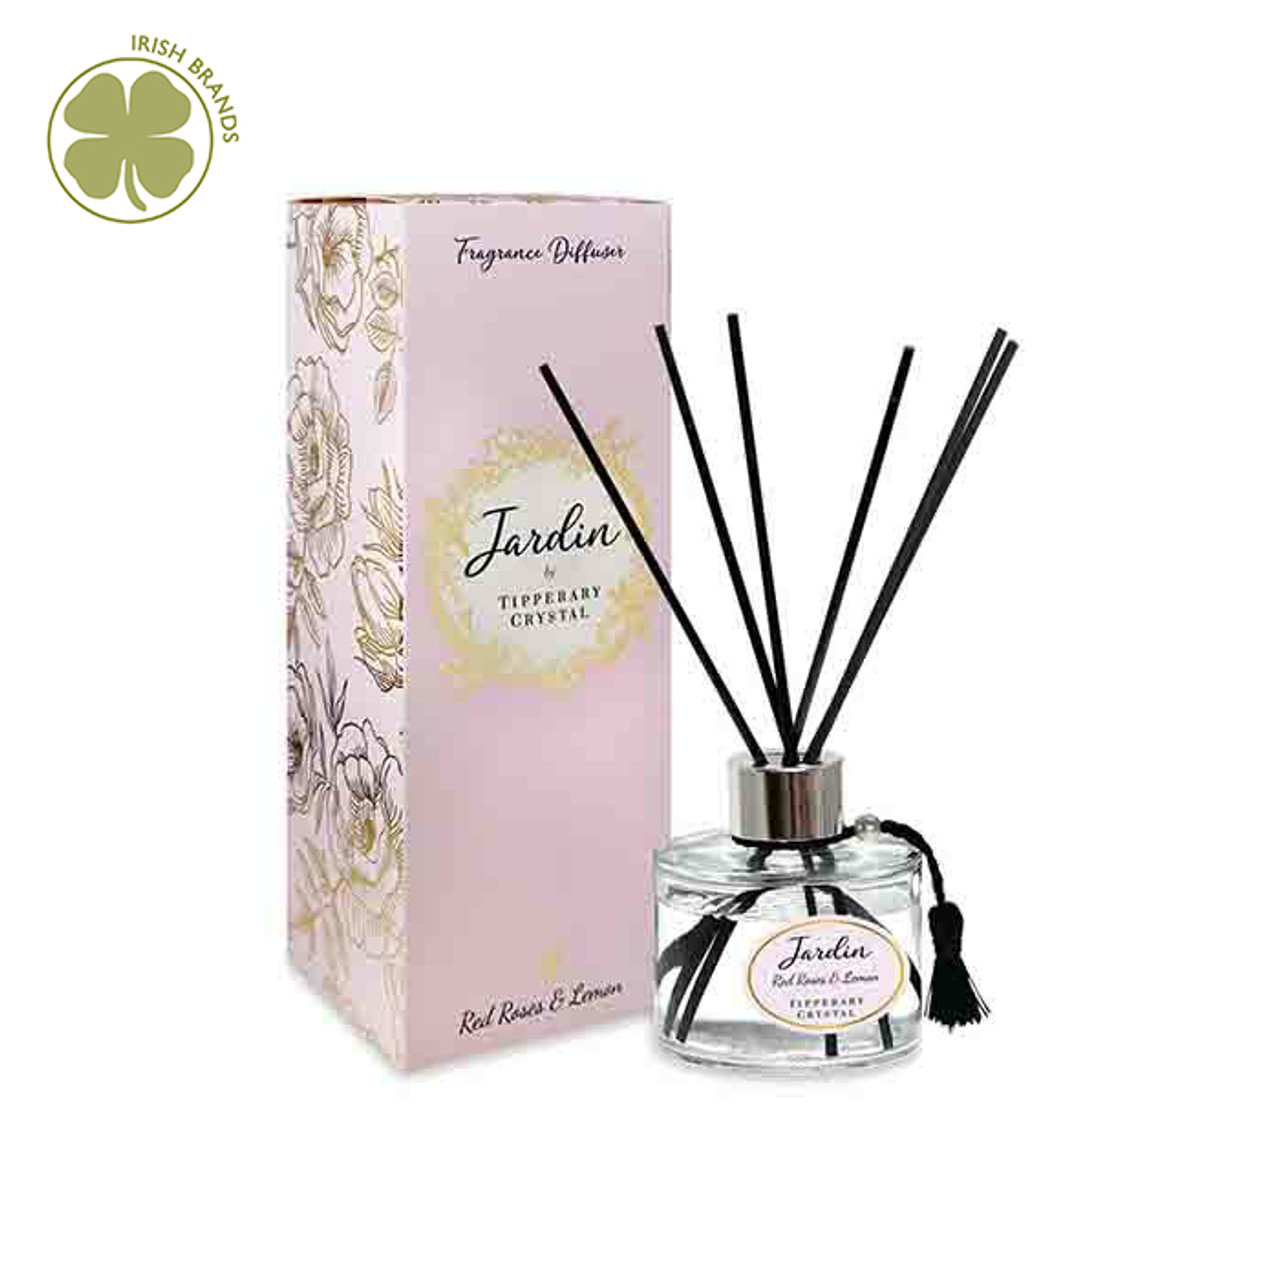 Red Roses & Lemon Jardin Collection Diffuser